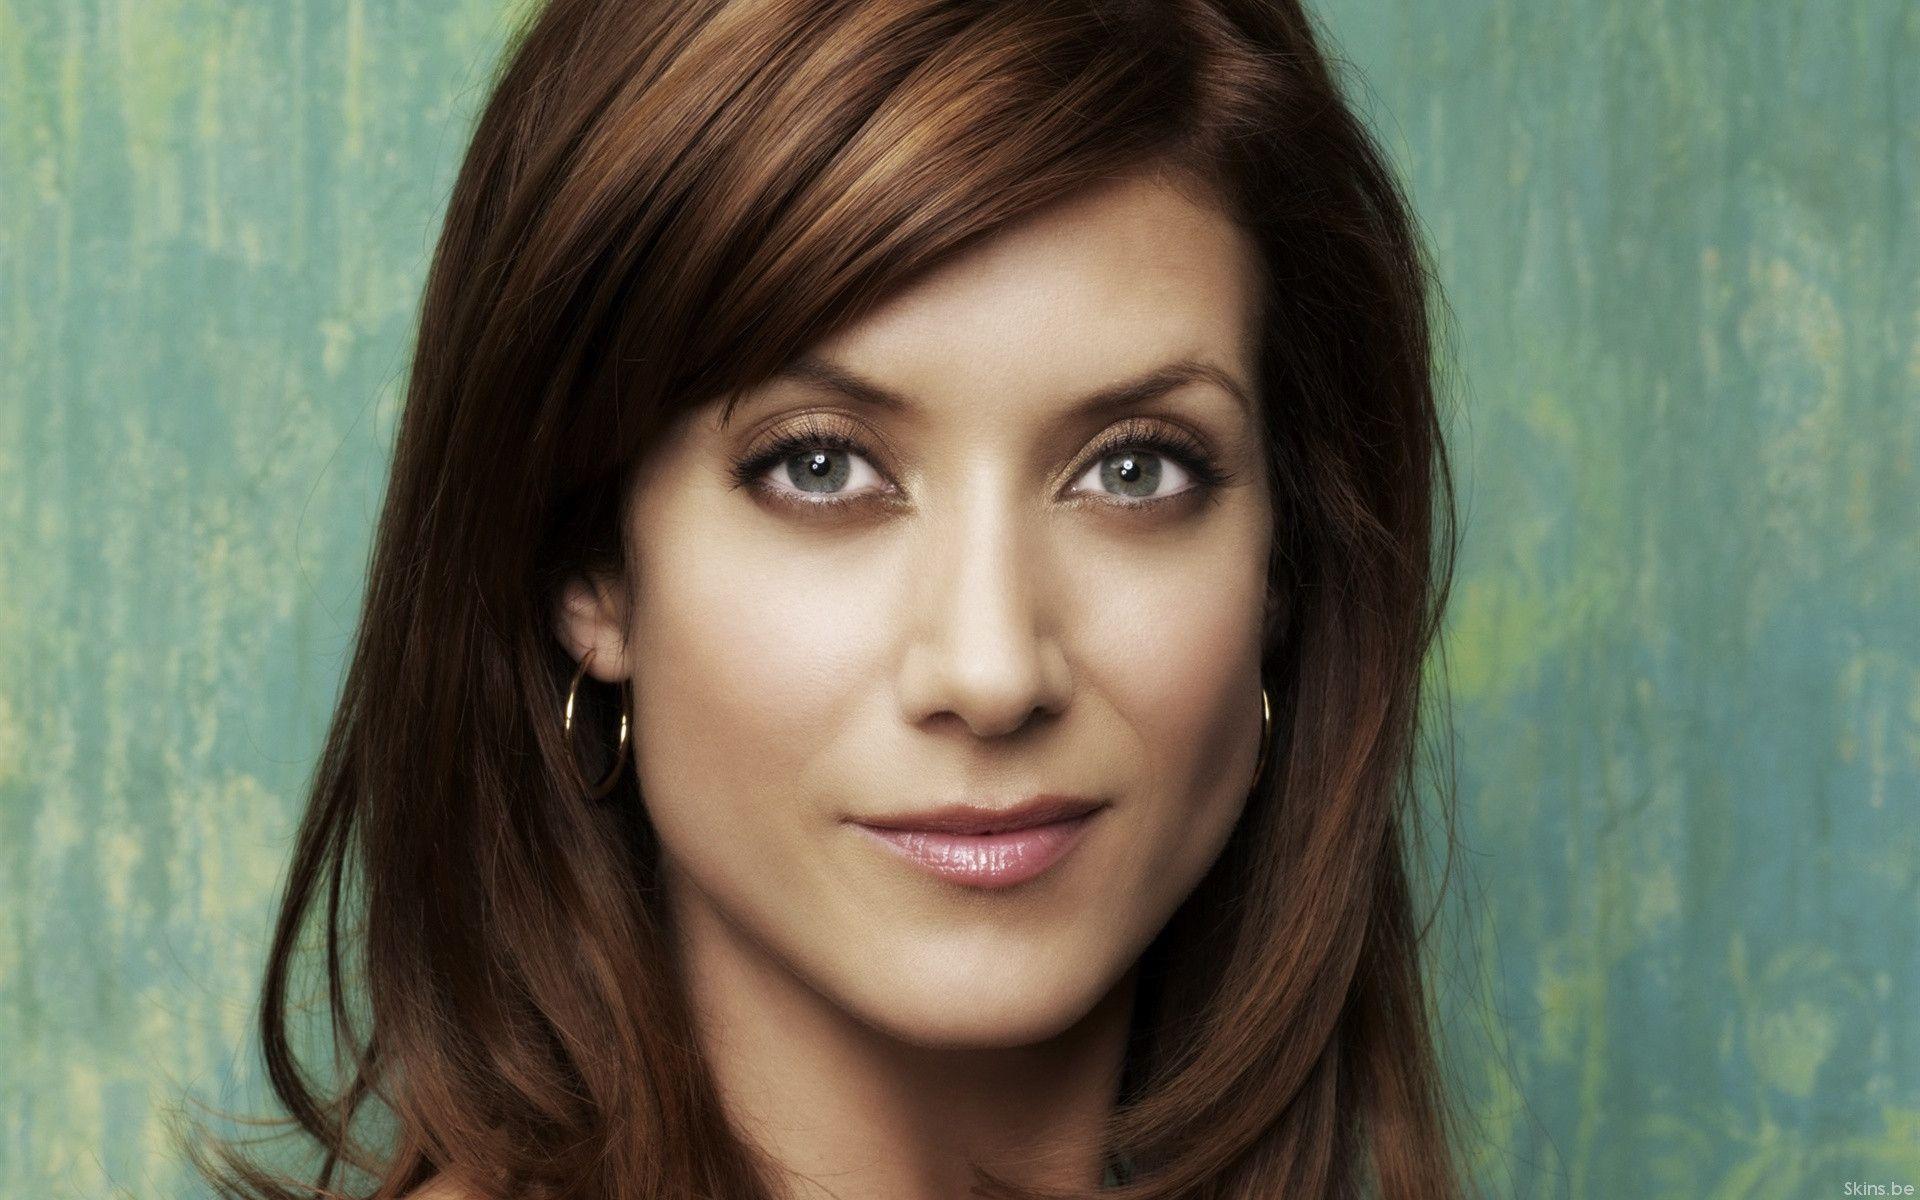 Kate Walsh Reveals She Was Diagnosed With a Brain Tumor in 2015 - E! Online